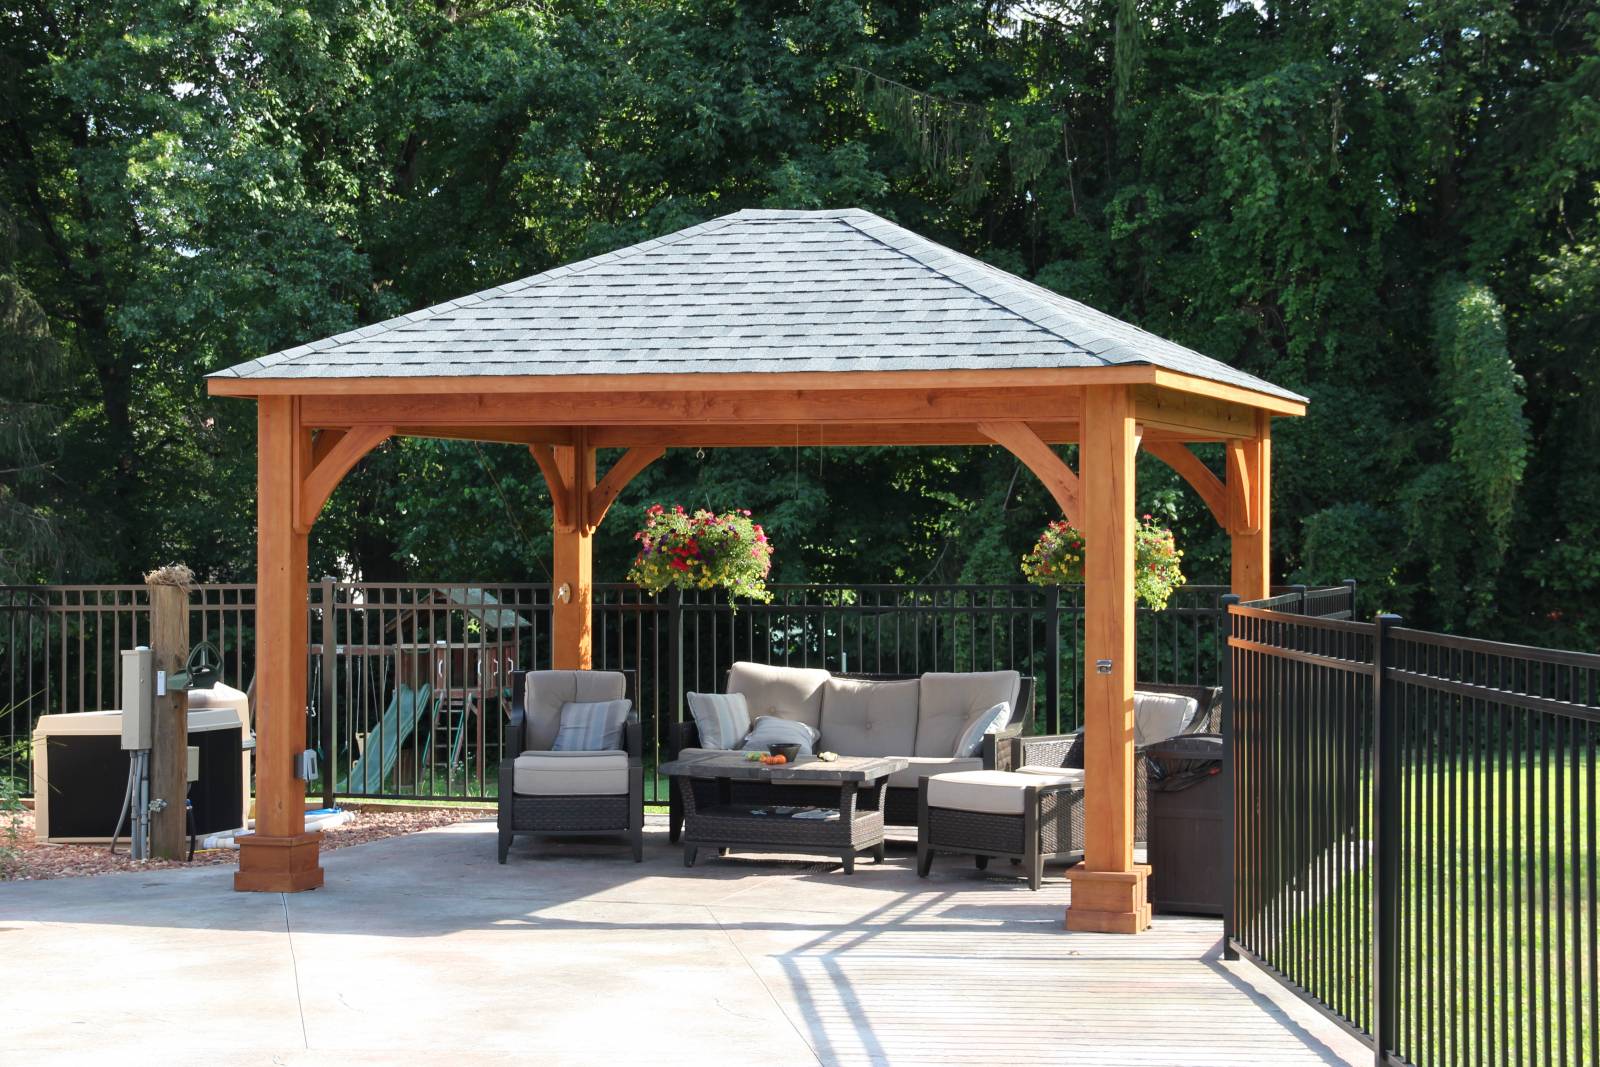 12' x 14' Easton Pavilion Shown with Options